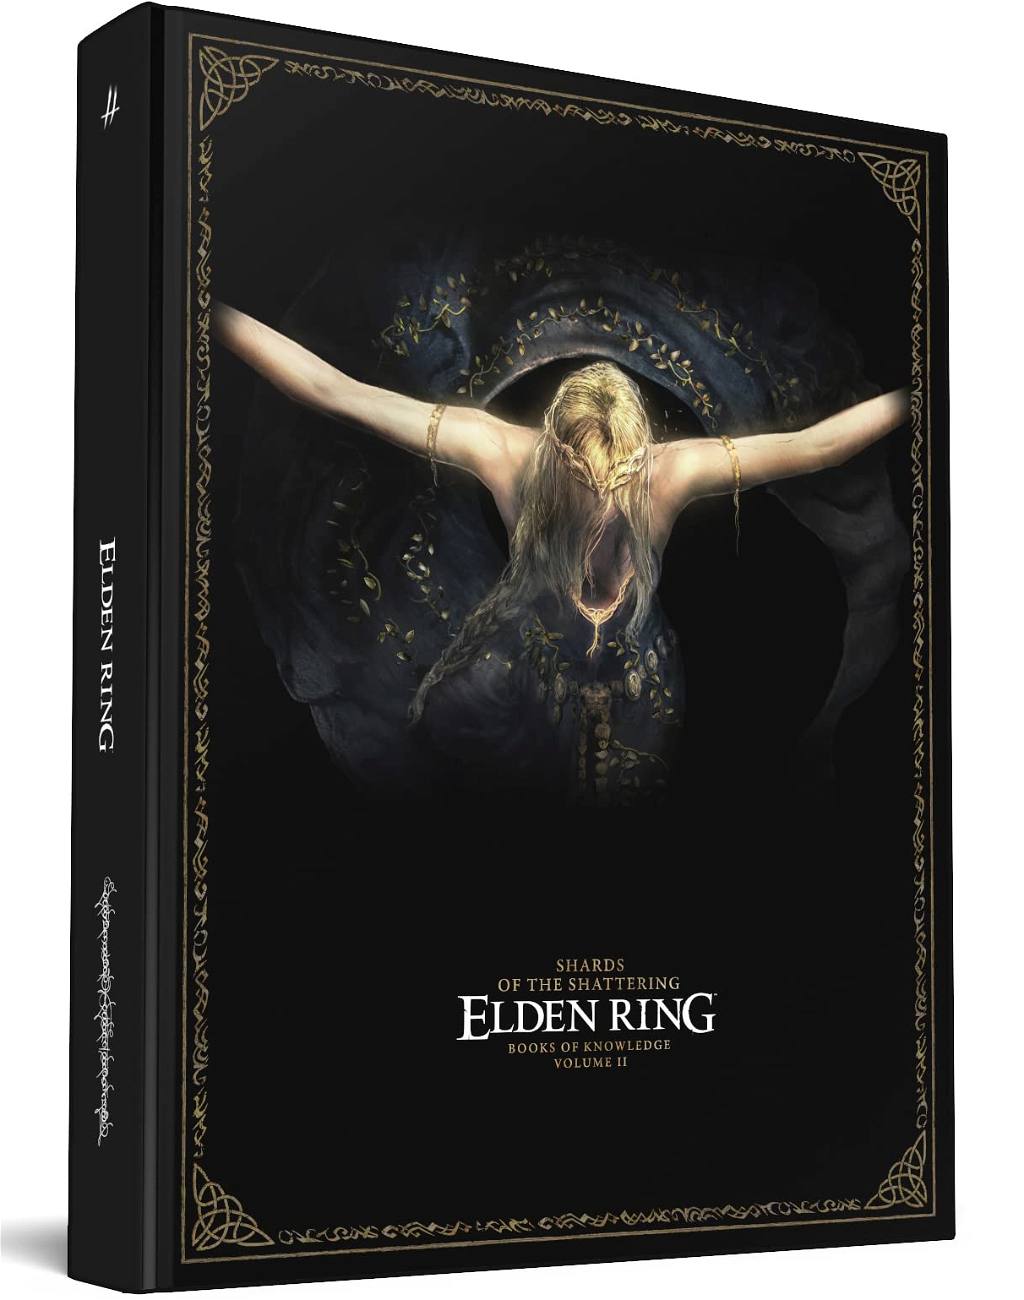 elden-ring-official-strategy-guide-vol-2-shards-of-the-shatteri-724265.1.jpg